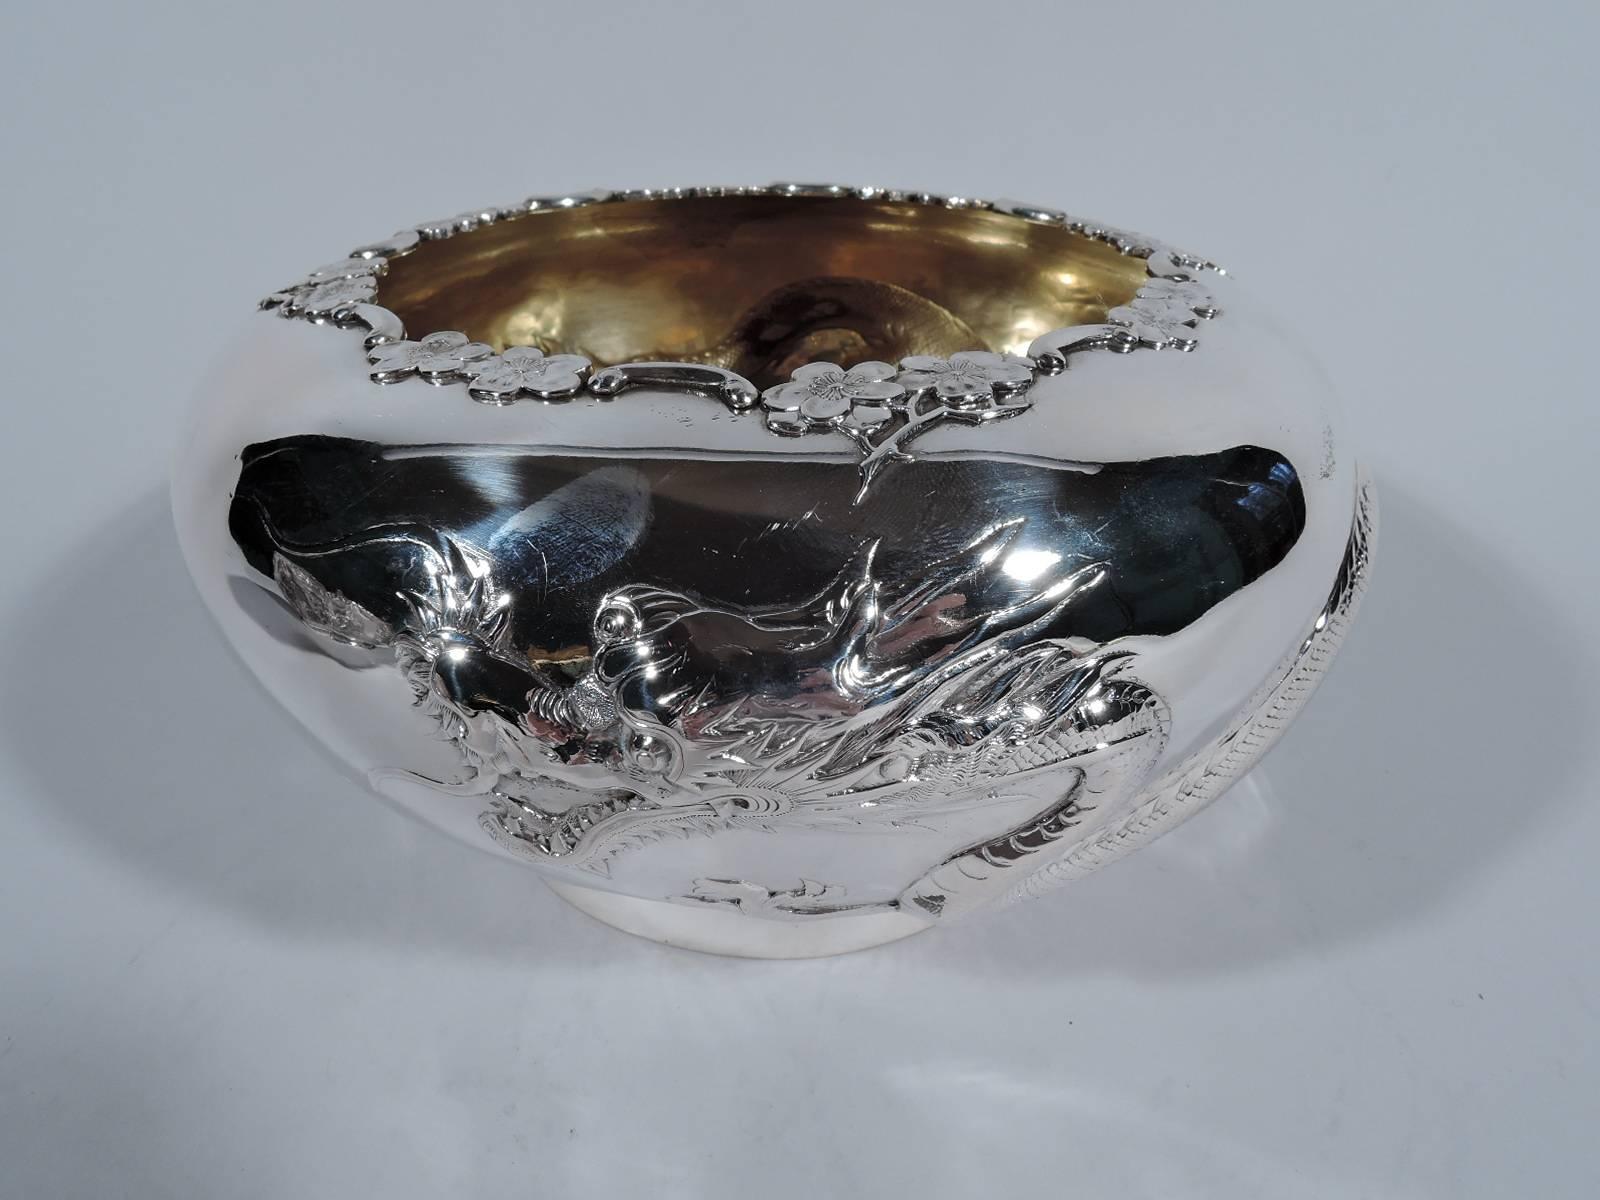 Chinese export silver bowl, circa 1900. Curved sides with turned-in mouth and spread foot. Exterior encircled with slithering, scaly, and horned dragon. Mouth rim has blossoming prunus branch. Interior lightly gilt. Hallmarked with Chinese